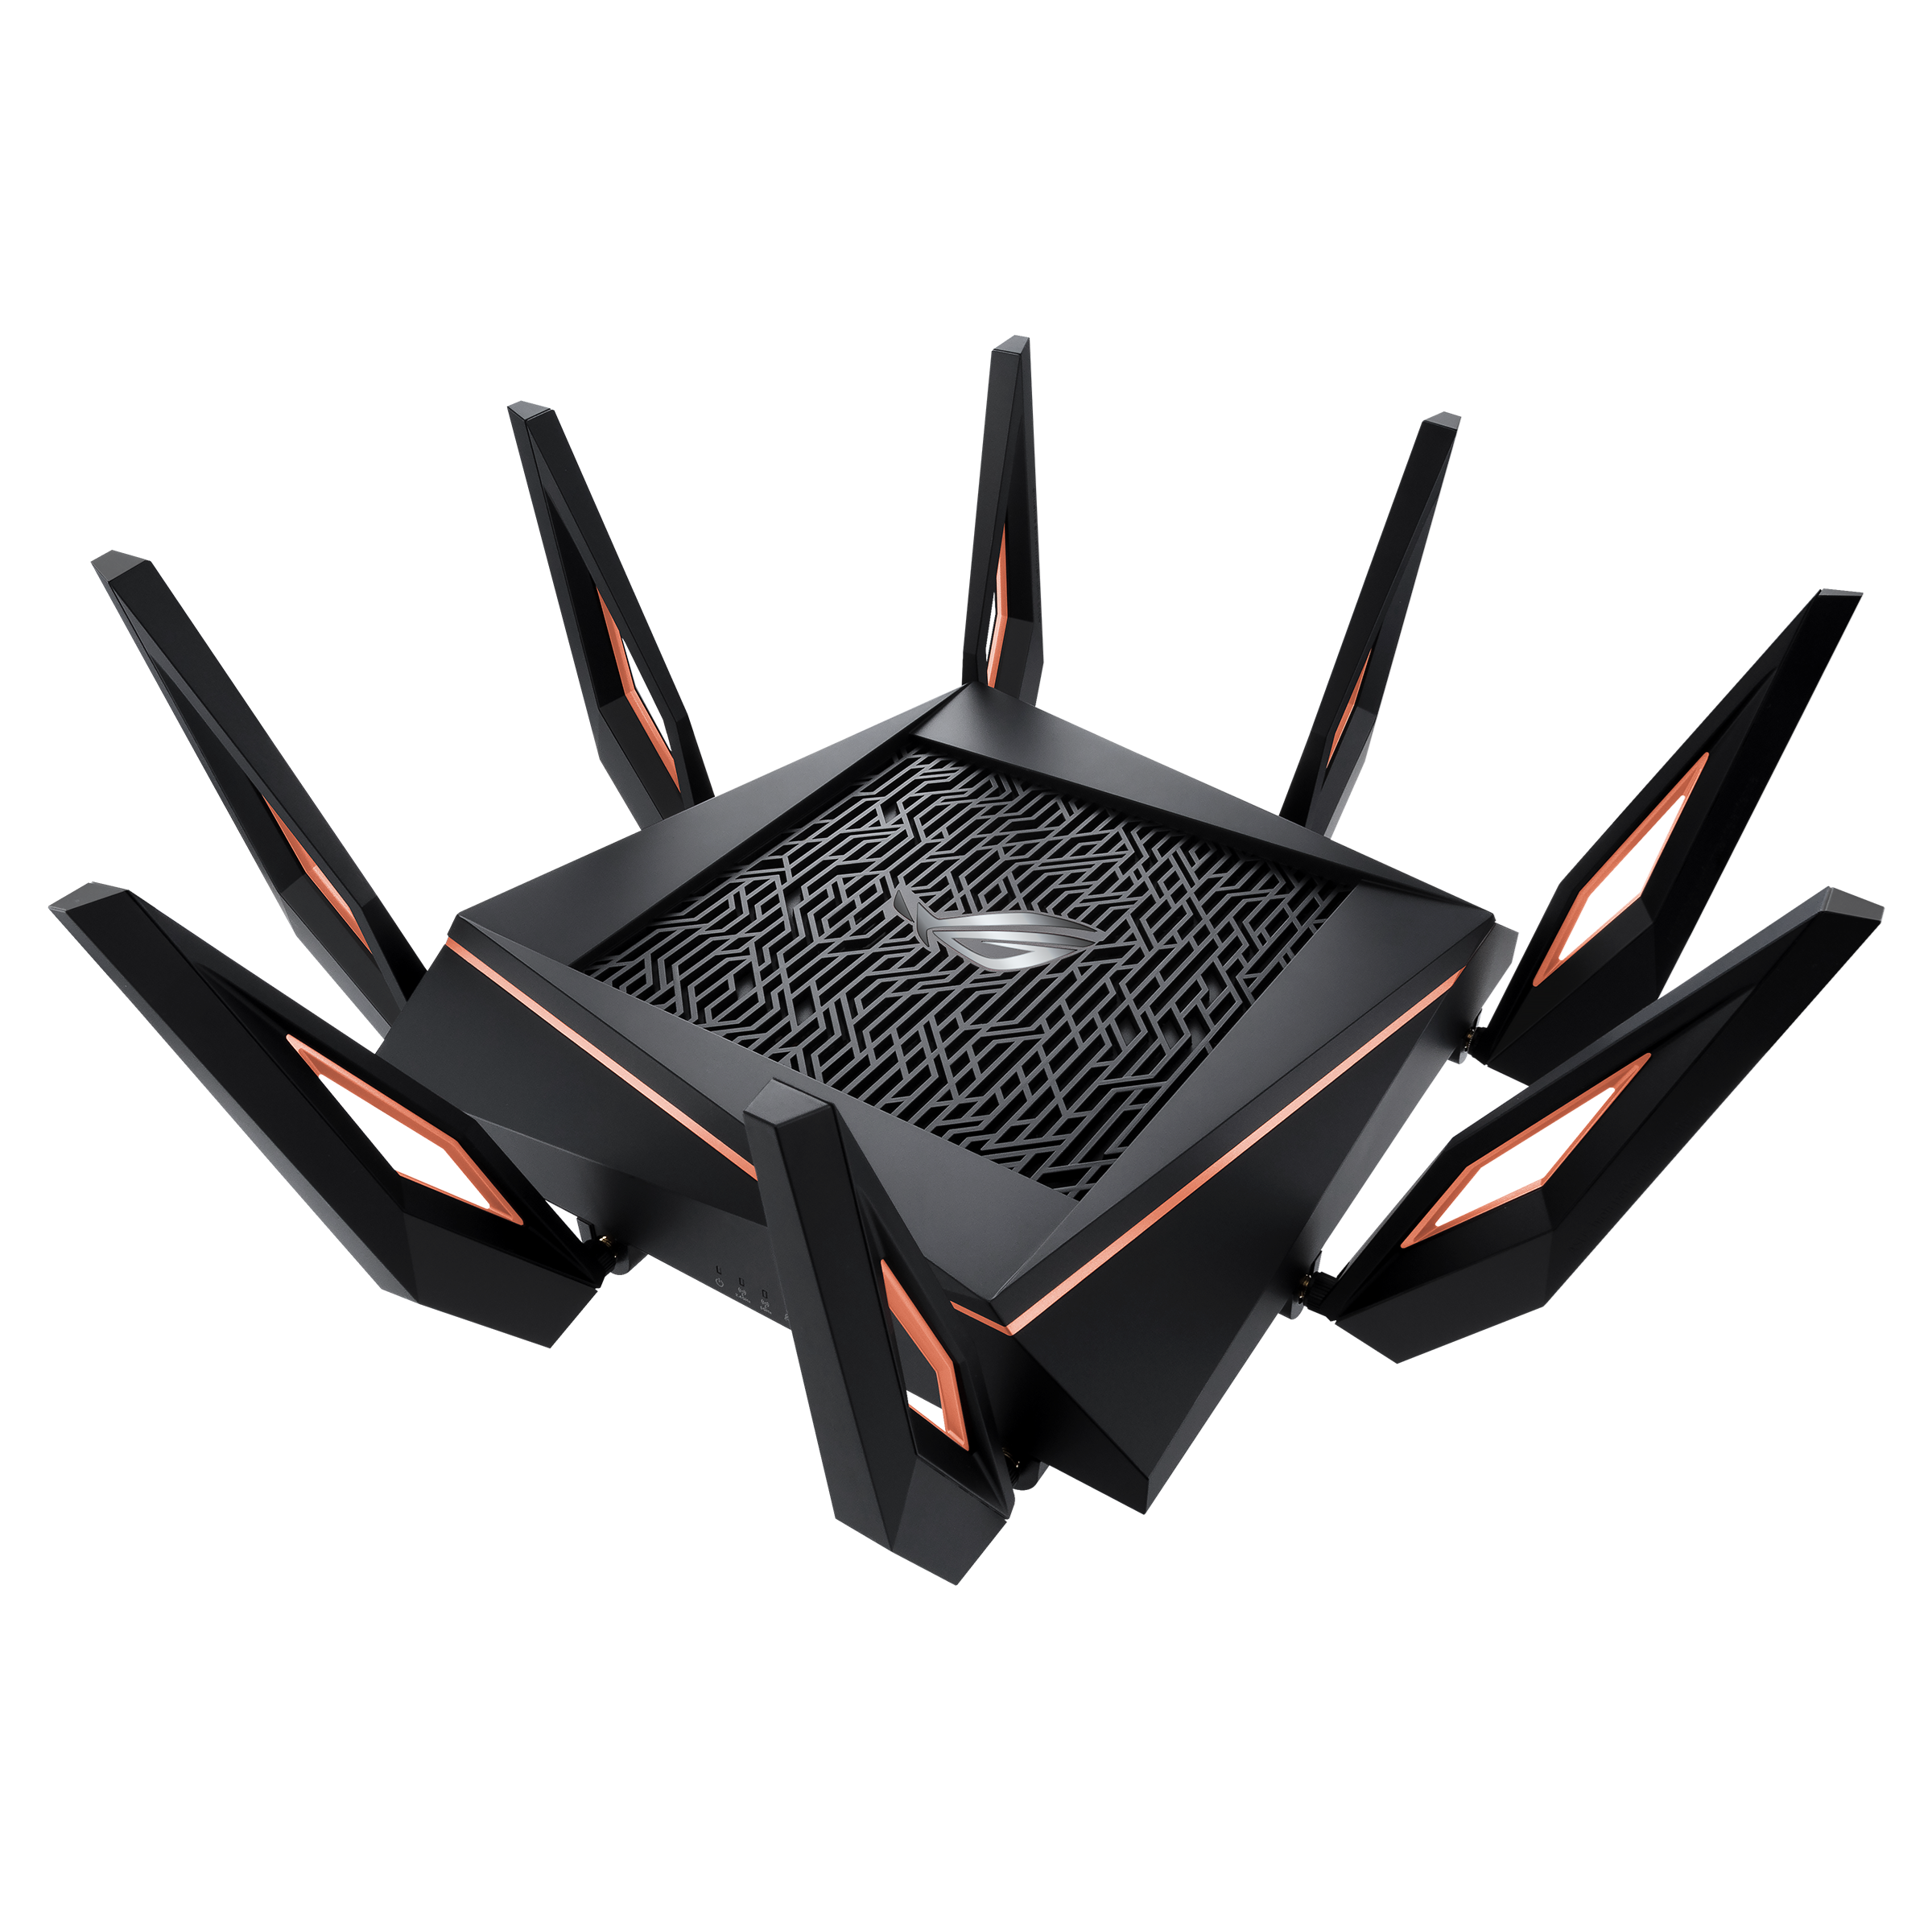 Routeur ASUS Gaming｜Routeurs Wi-Fi｜ASUS France